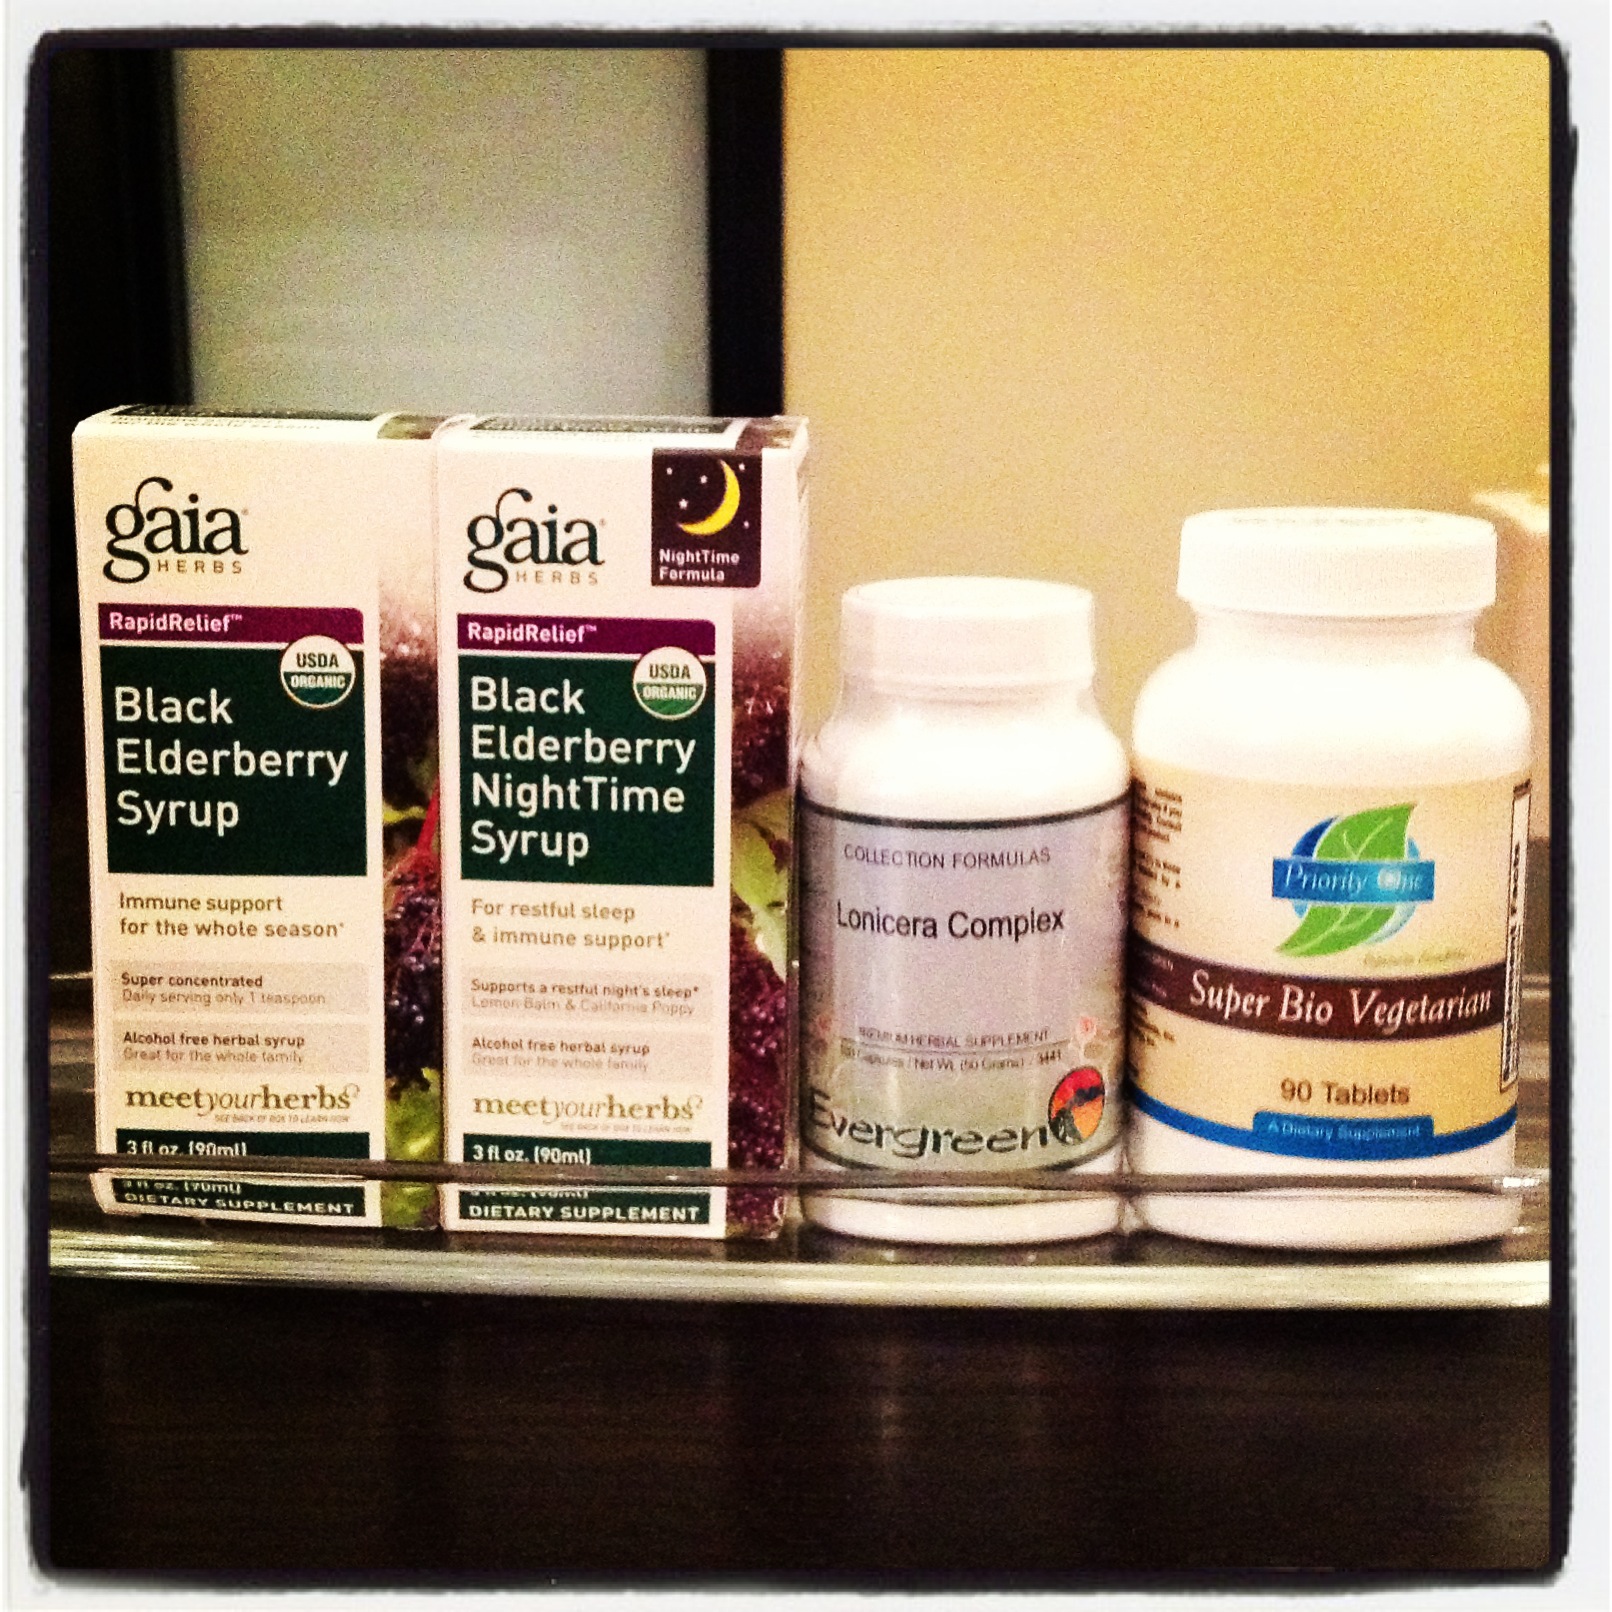 Liz's Picks for your home medicine cabinet are for sale on the online store: Super Bio Vegetarian Immune Support by Priority One, Lonicera Complex by Evergreen and Black Elderberry Syrup by Gaia. 